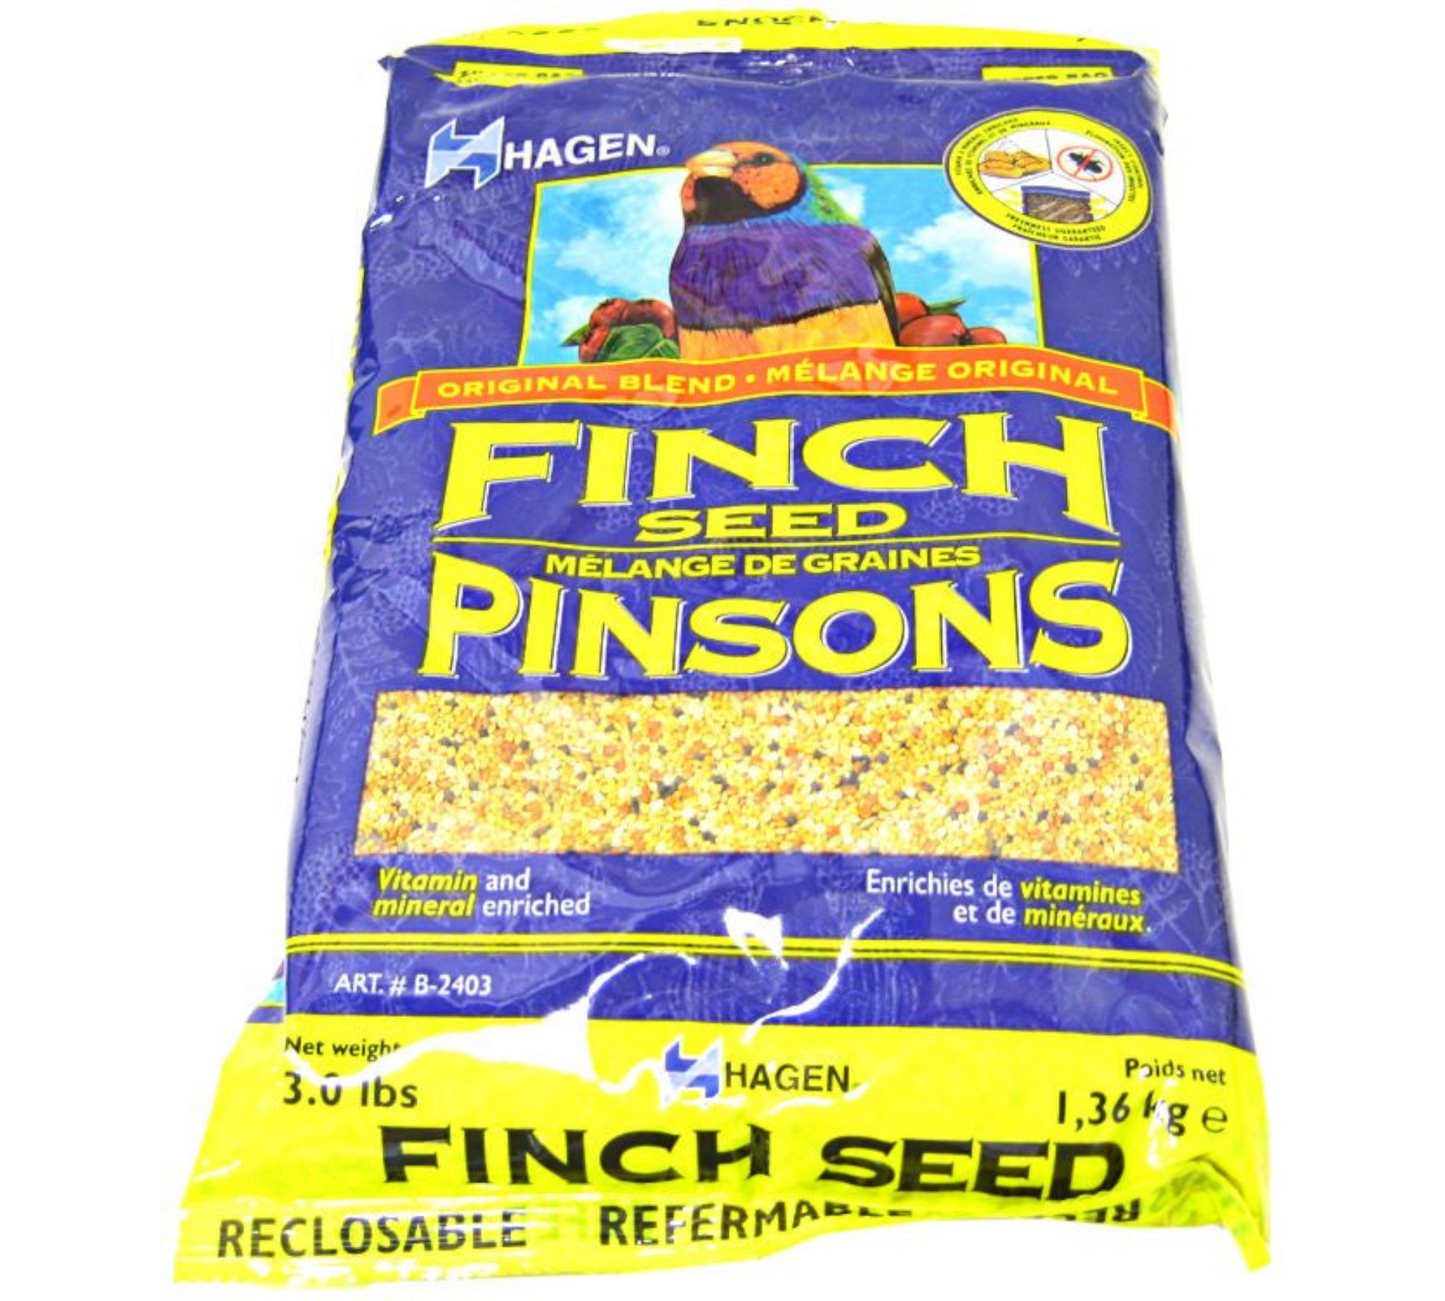 Hagen Finch Seed Vitamin and Mineral Enriched,